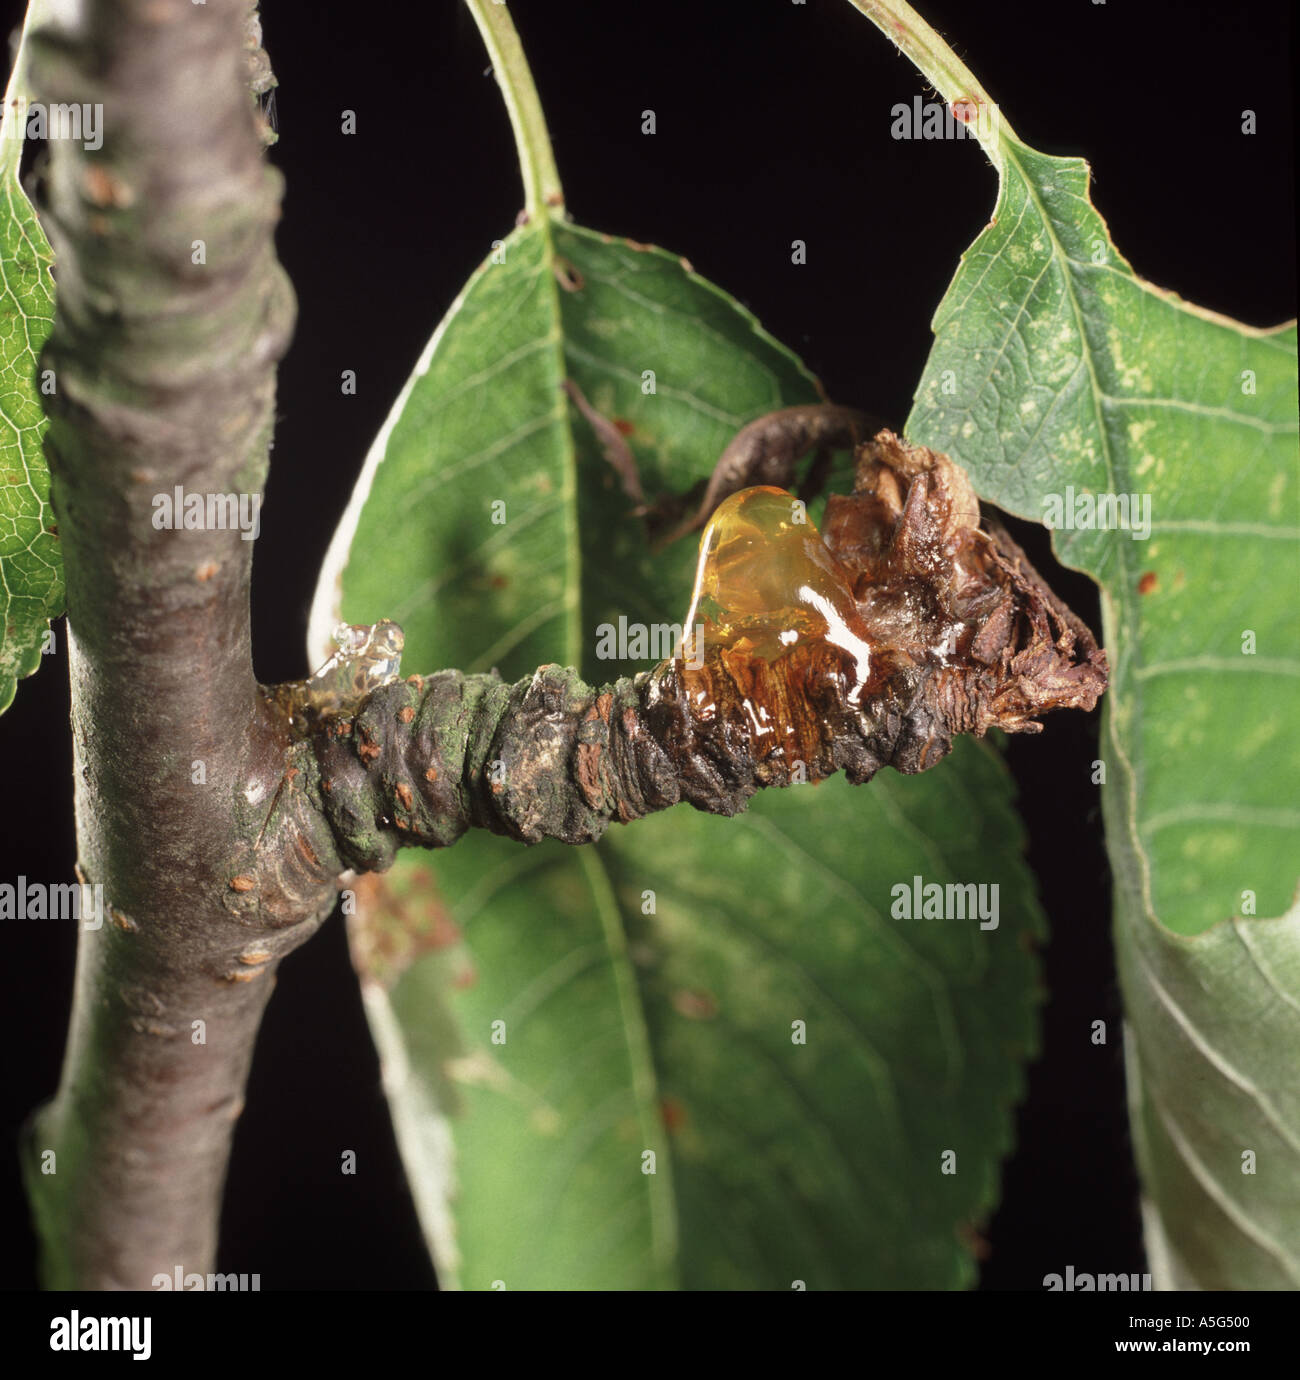 Bacterial canker Pseudomonas syringae showing gum exudation on apical buds and leaves of a cherry tree Stock Photo